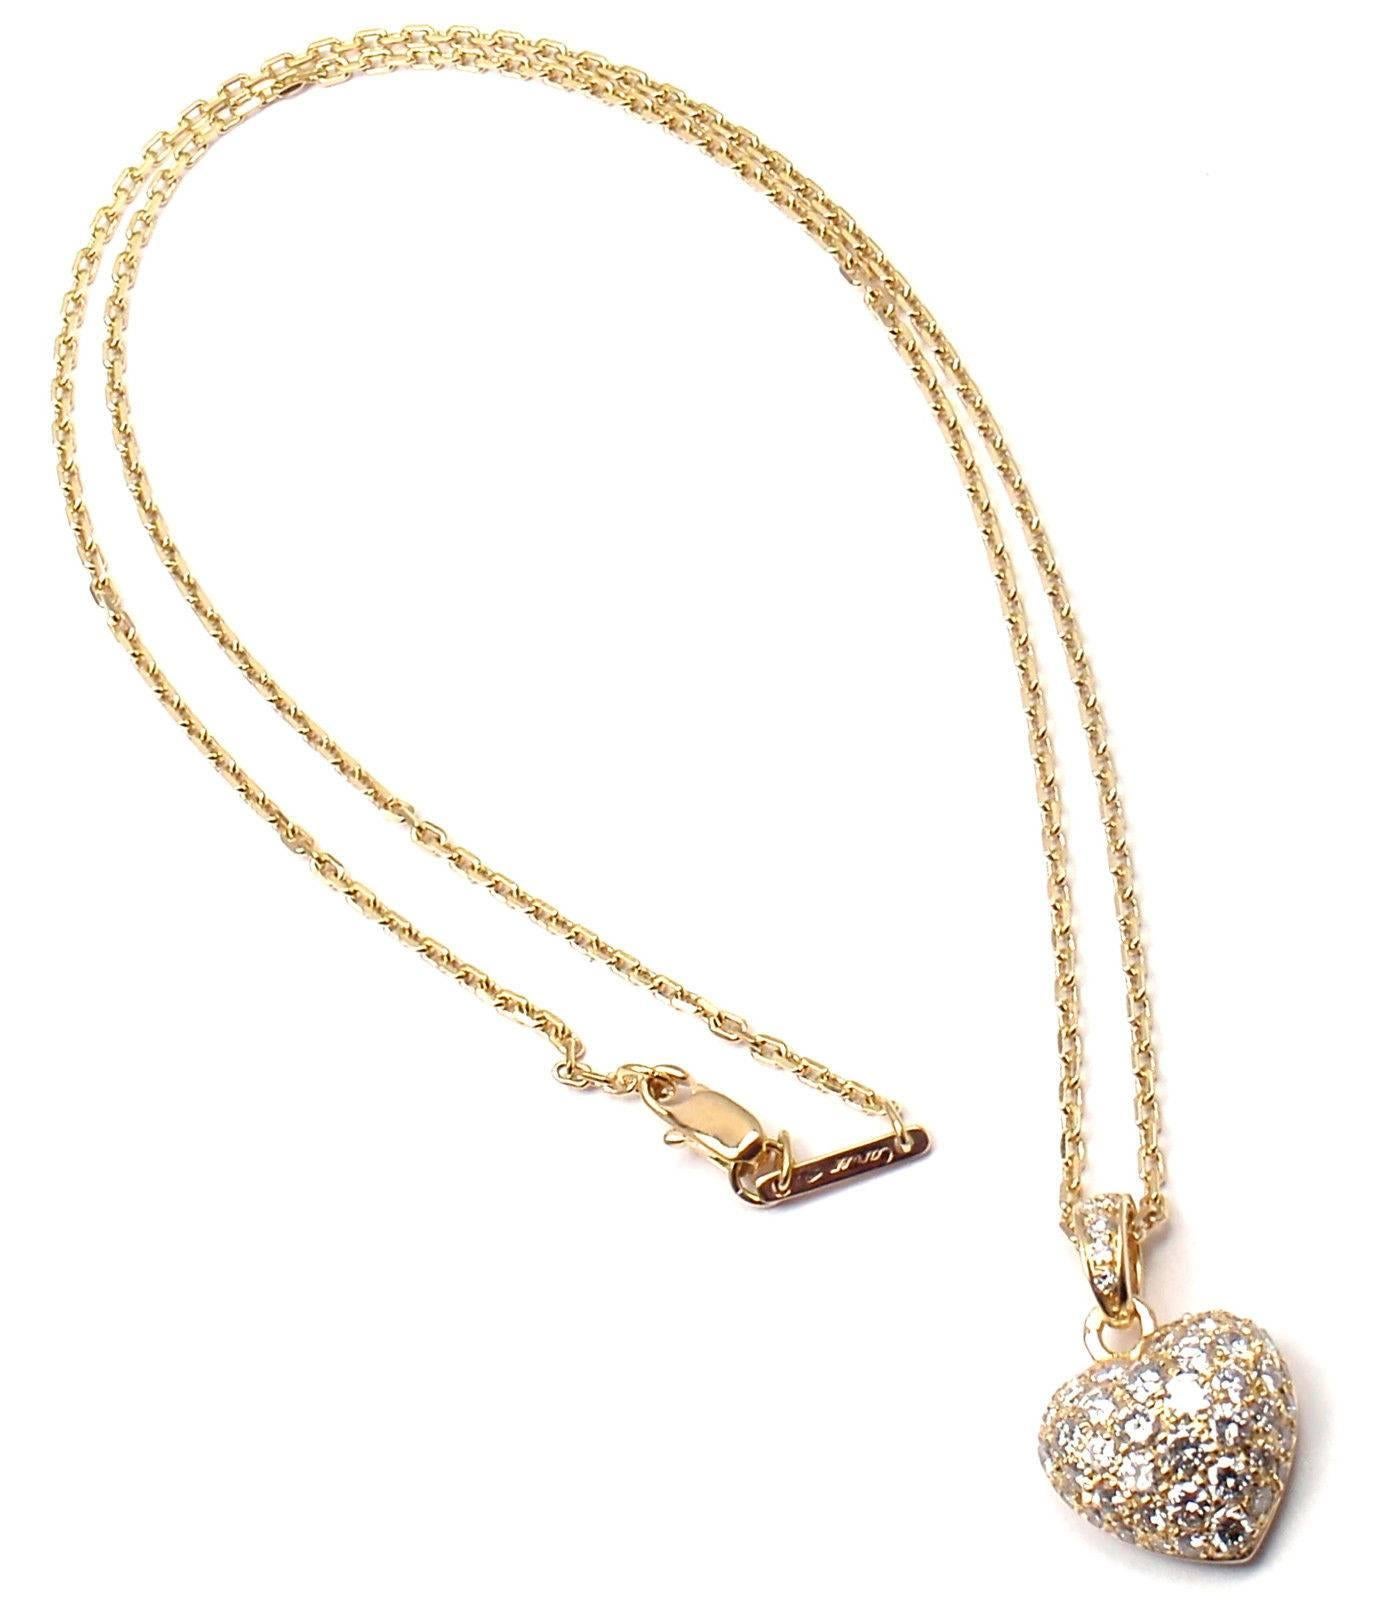 18k Yellow Gold Diamond Heart Pendant Necklace by Cartier. 
With Round brilliant cut diamonds VS1 clarity Ecolor total weight approx. 1.40ct
This necklace comes with Cartier box.
 
Details: 
Chain Length: 18